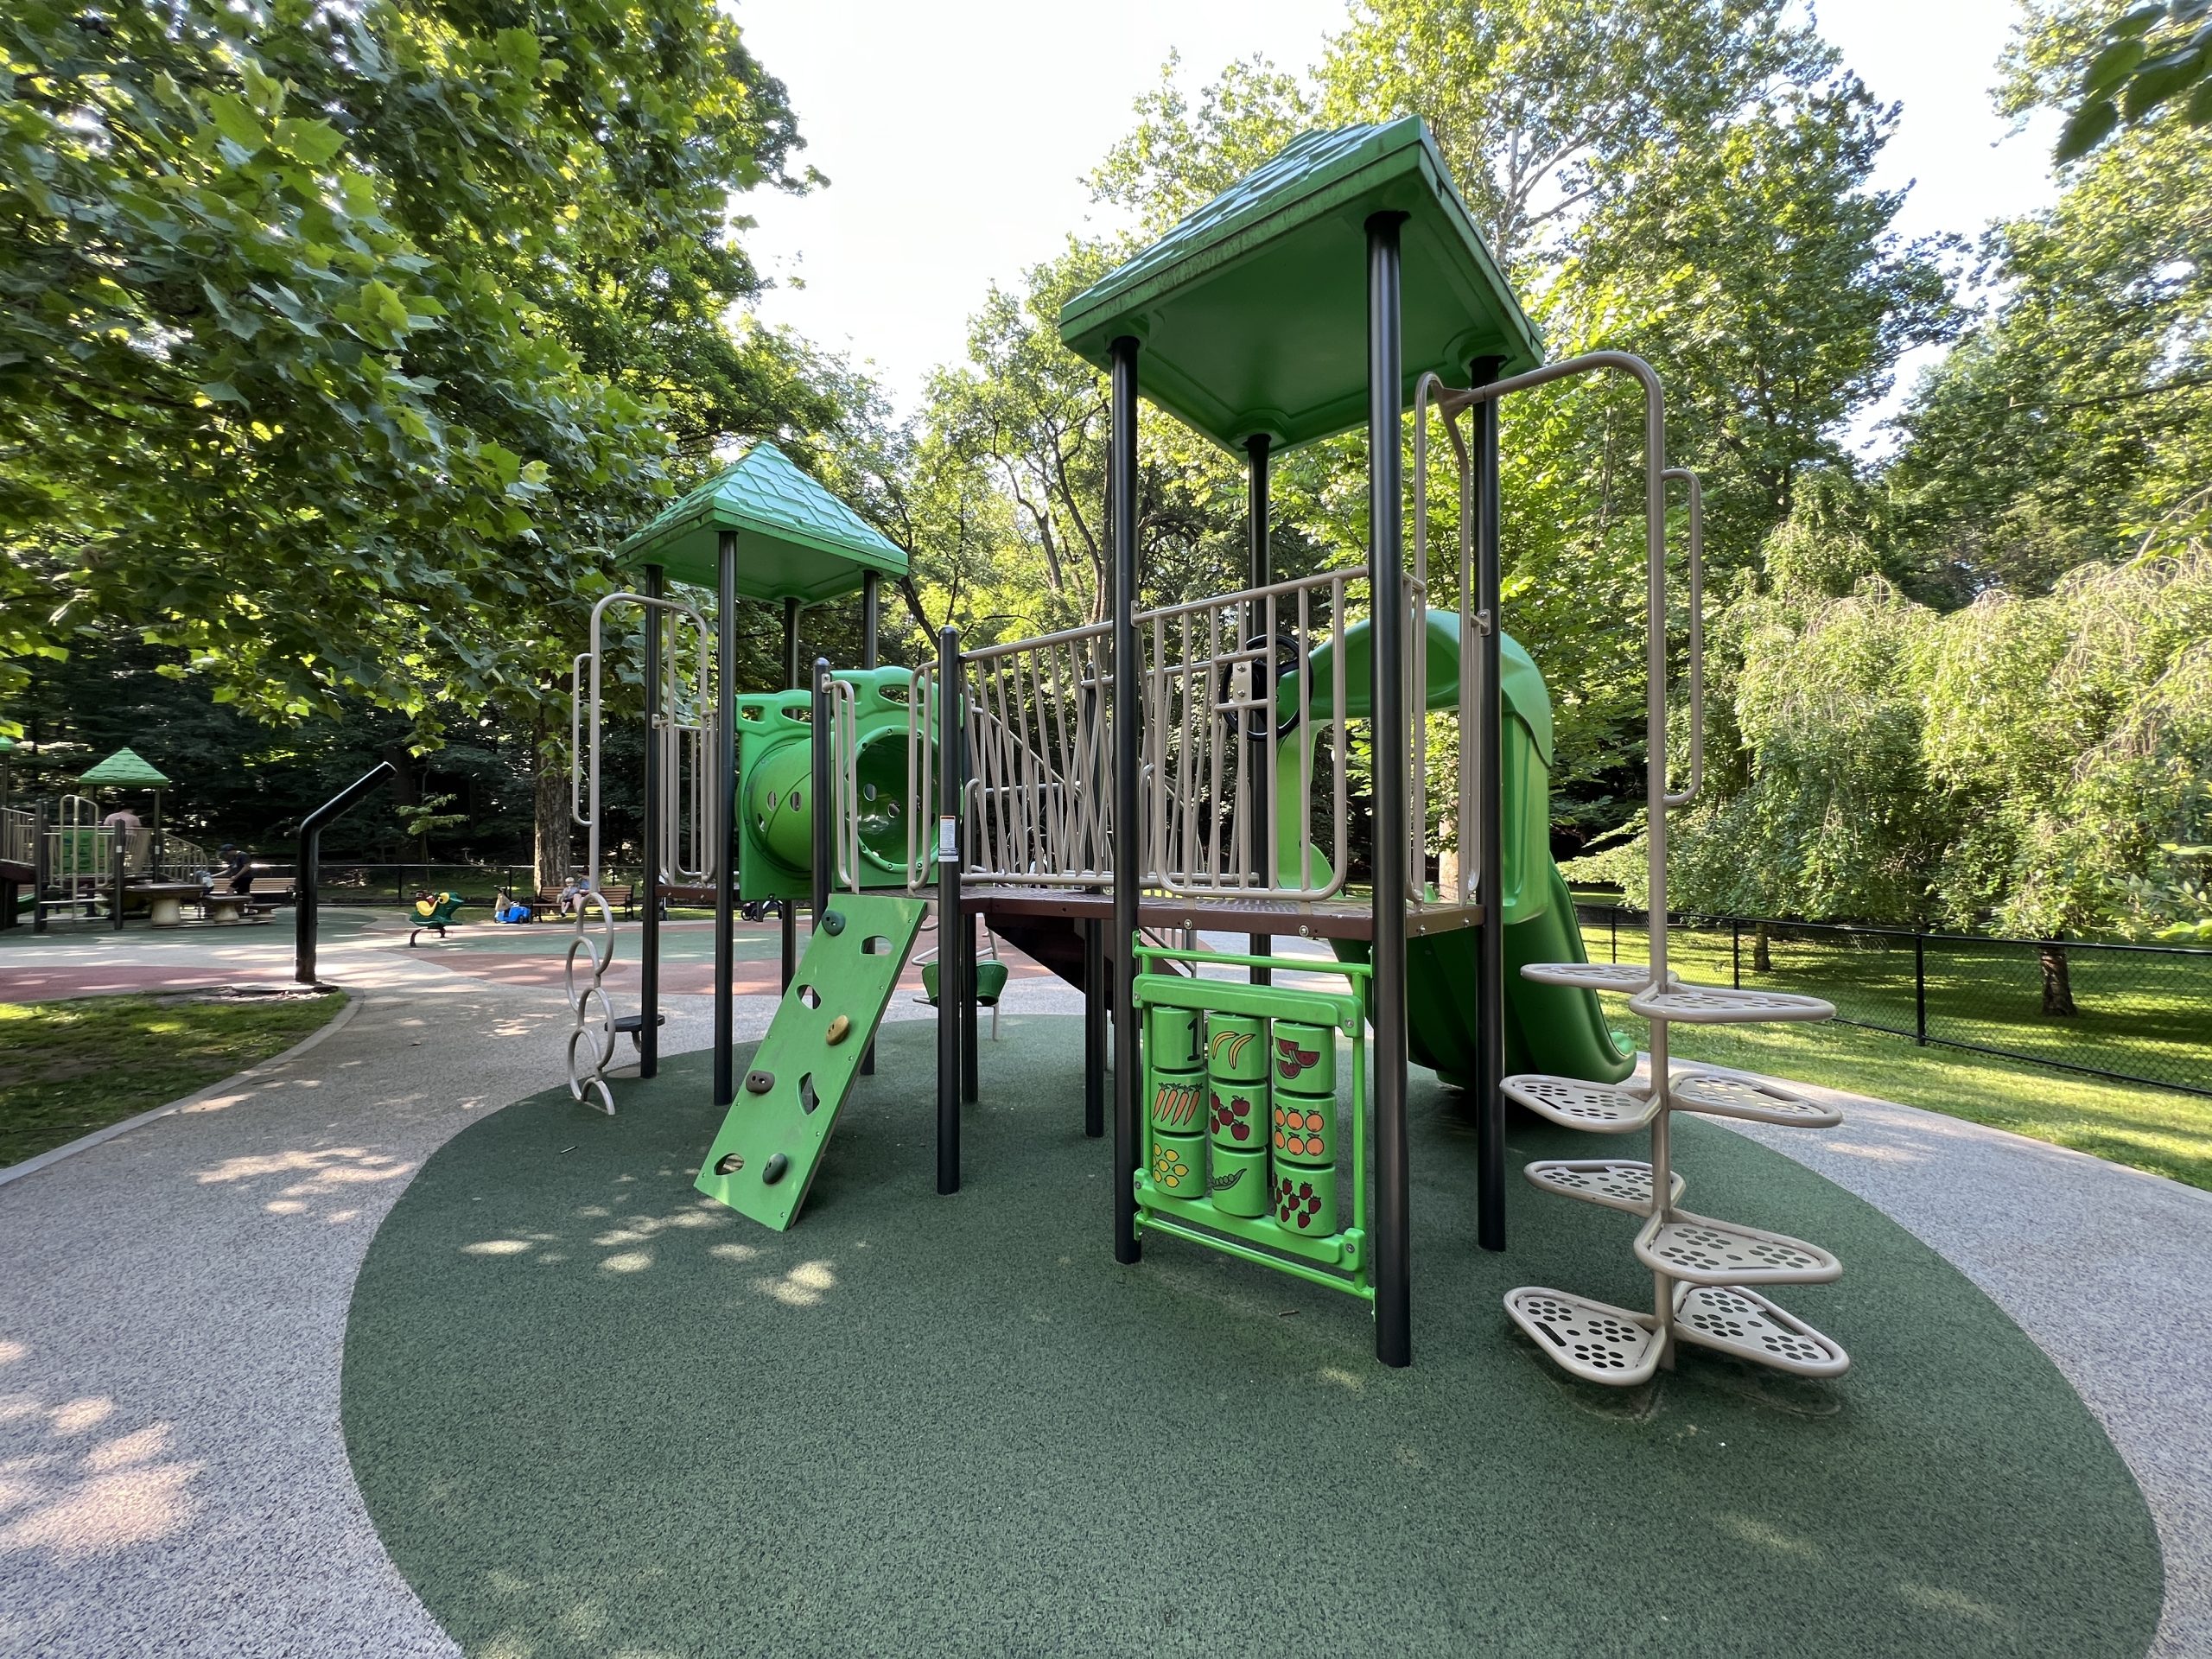 Grover Cleveland Playgrounds in Caldwell NJ - Small Playground Structure - WIDE climbing view